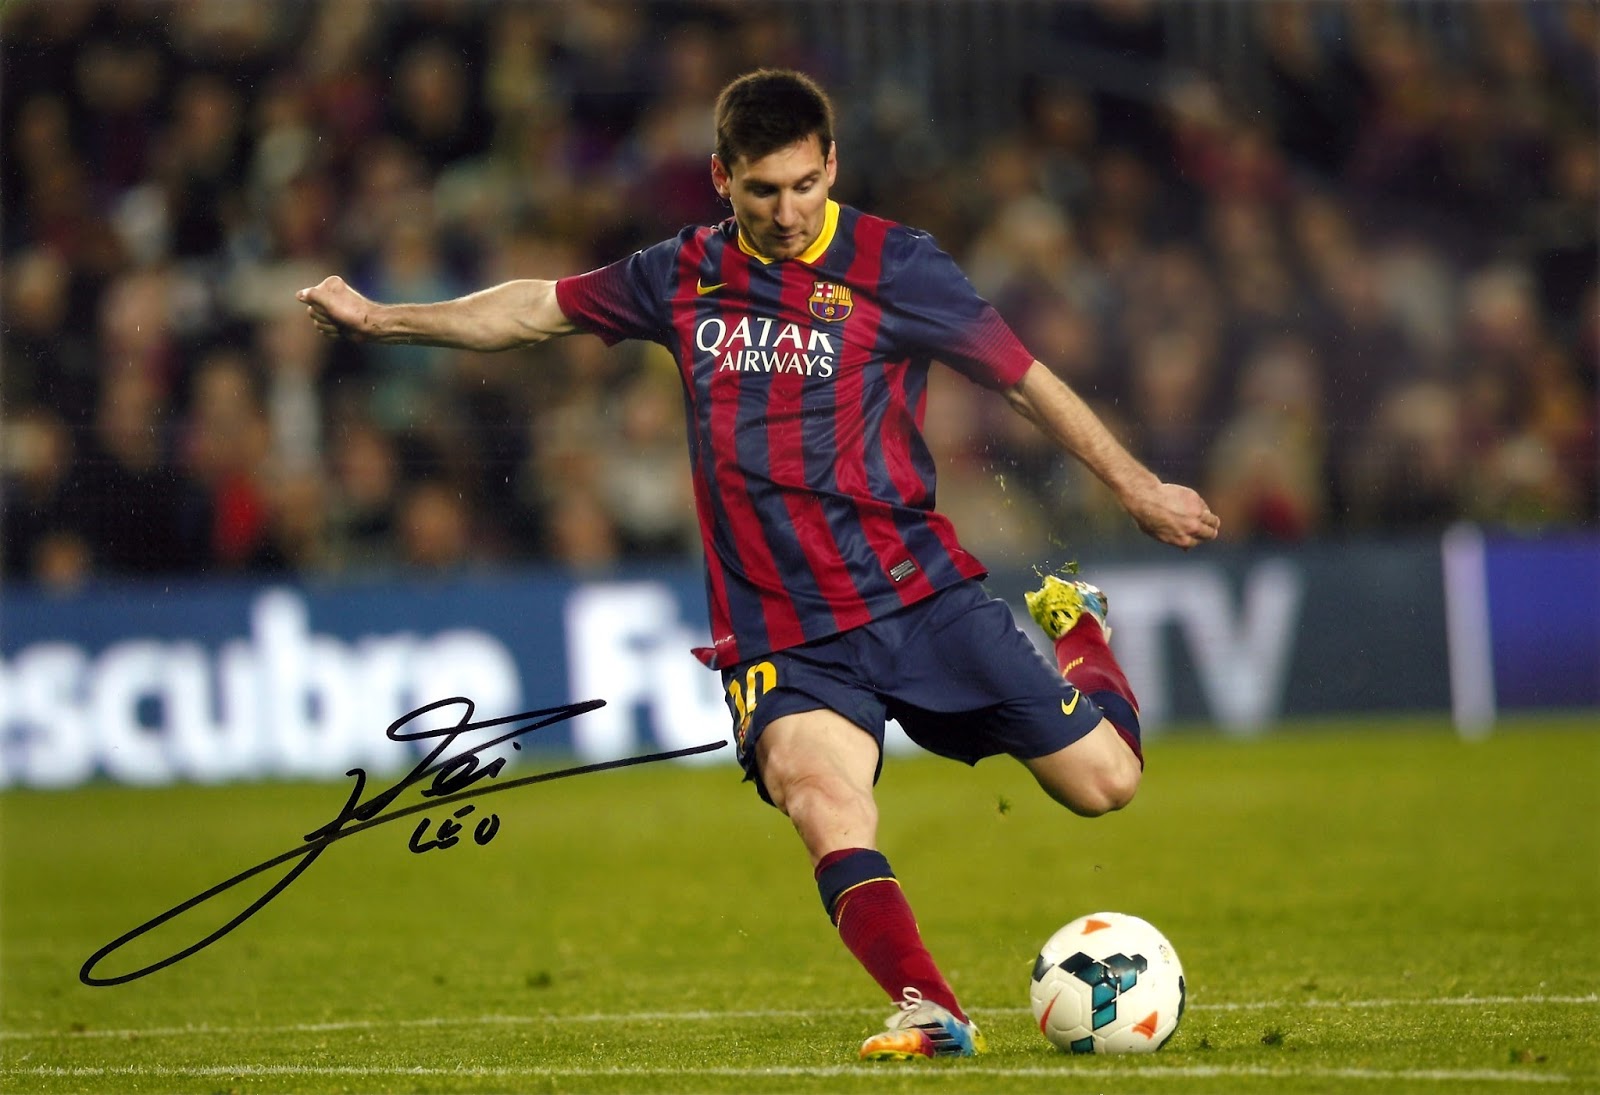 Panini Nations Sticker and Card Collection: Messi autograph